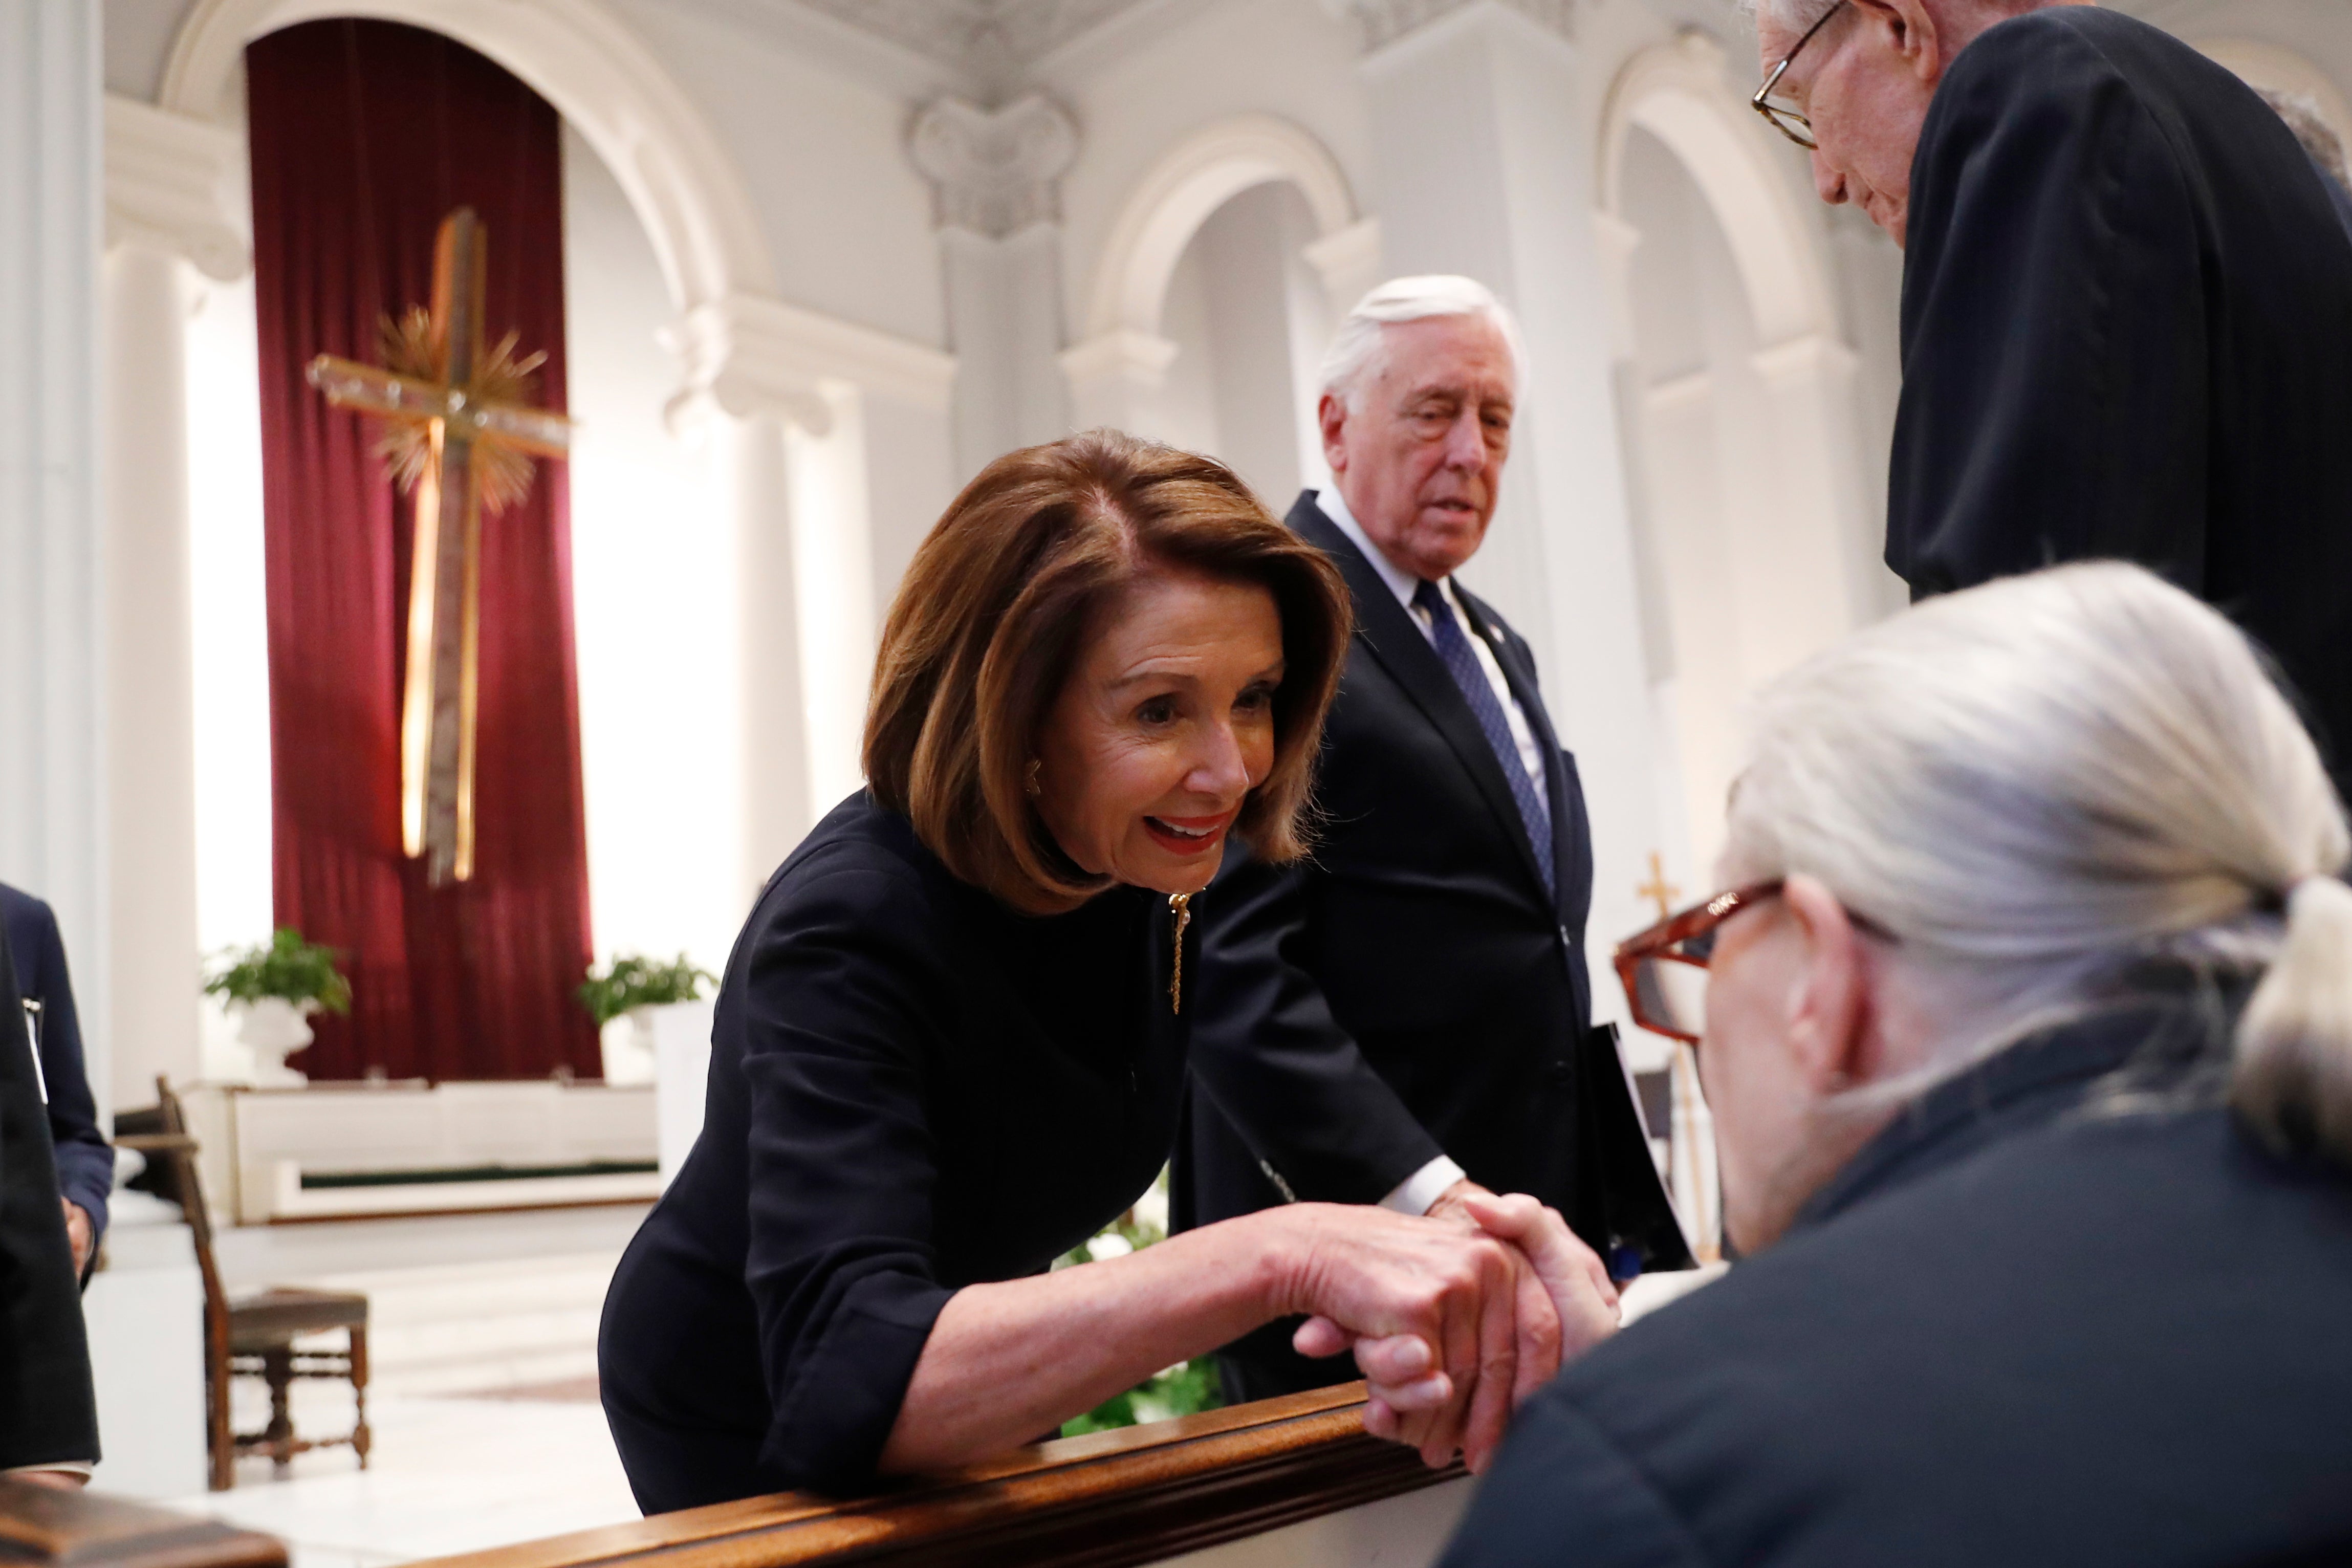 House Speaker Nancy Pelosi and Rep. Steny Hoyer (D-MD) greet family members before a funeral service for former Rep. John Dingell on February 14, 2019 at Holy Trinity Catholic Church in Washington, DC.